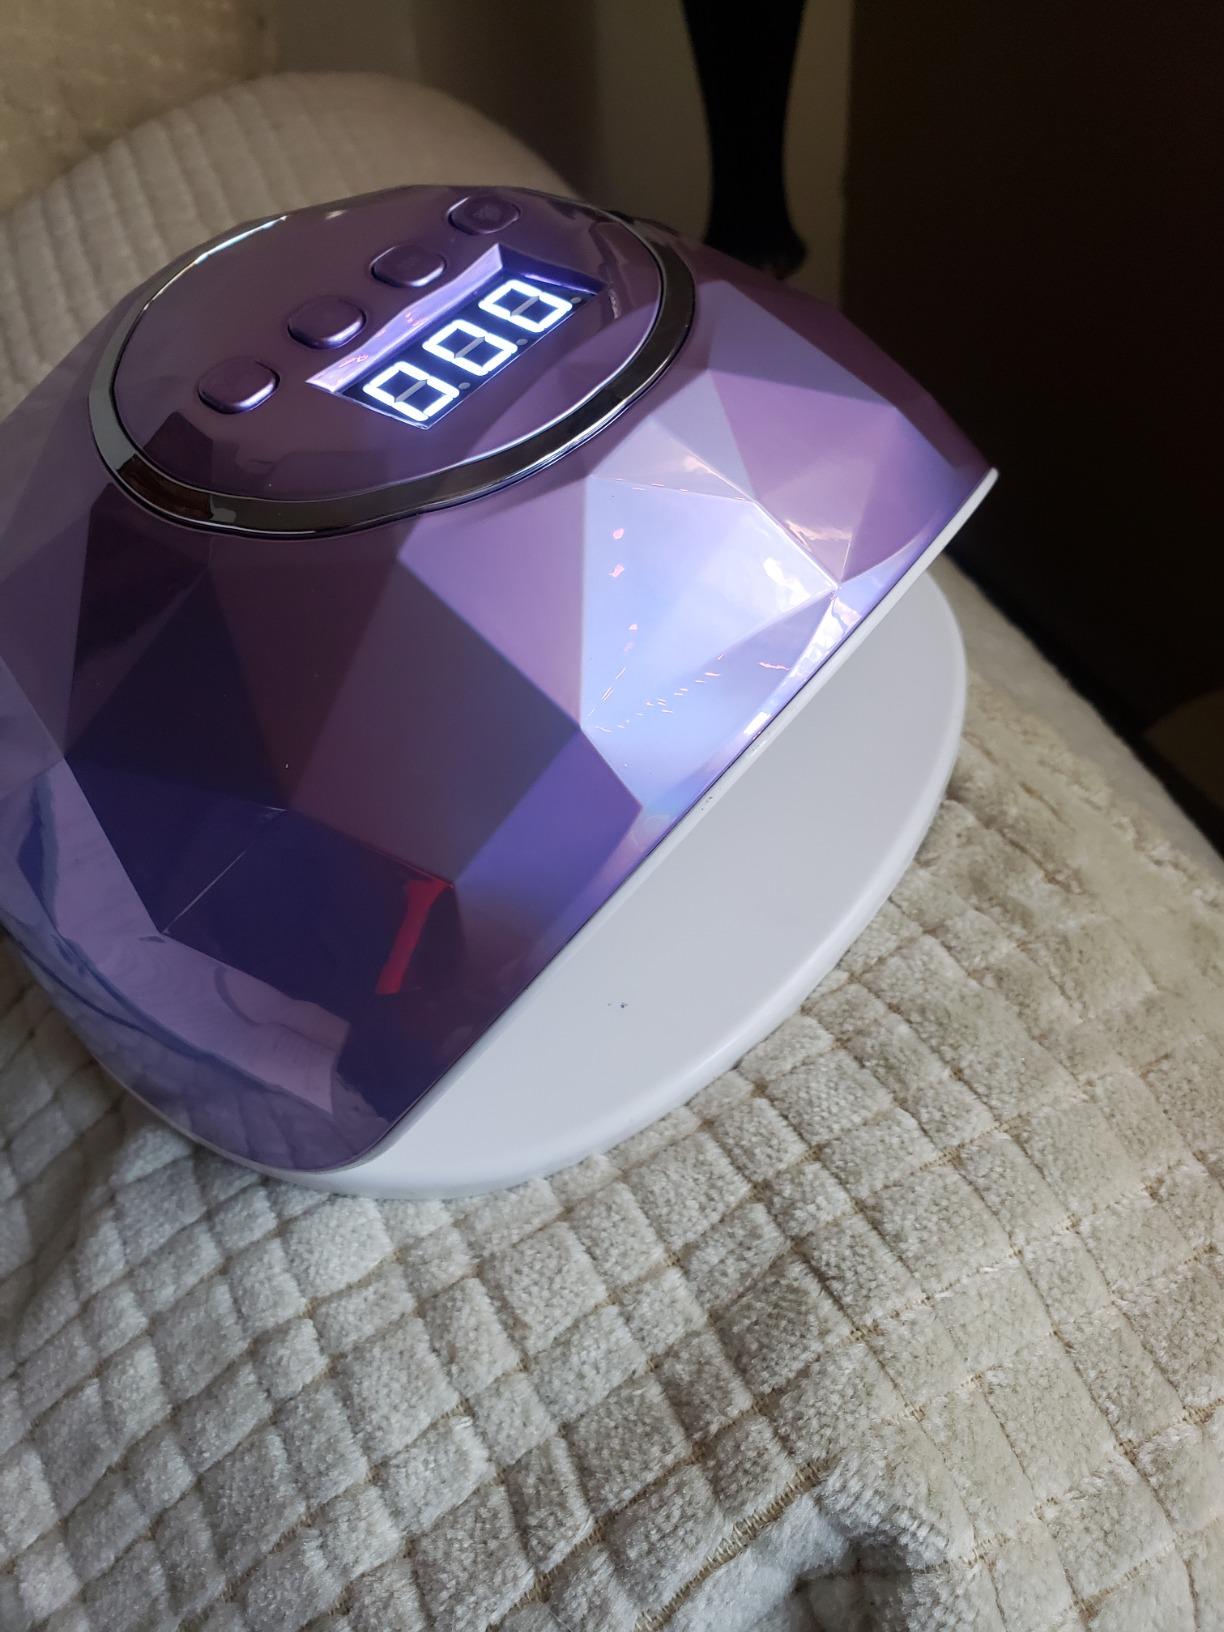 86W UV LED Nail Dryer with 4 Timer Setting, Auto Sensor & Overheat Protection photo review